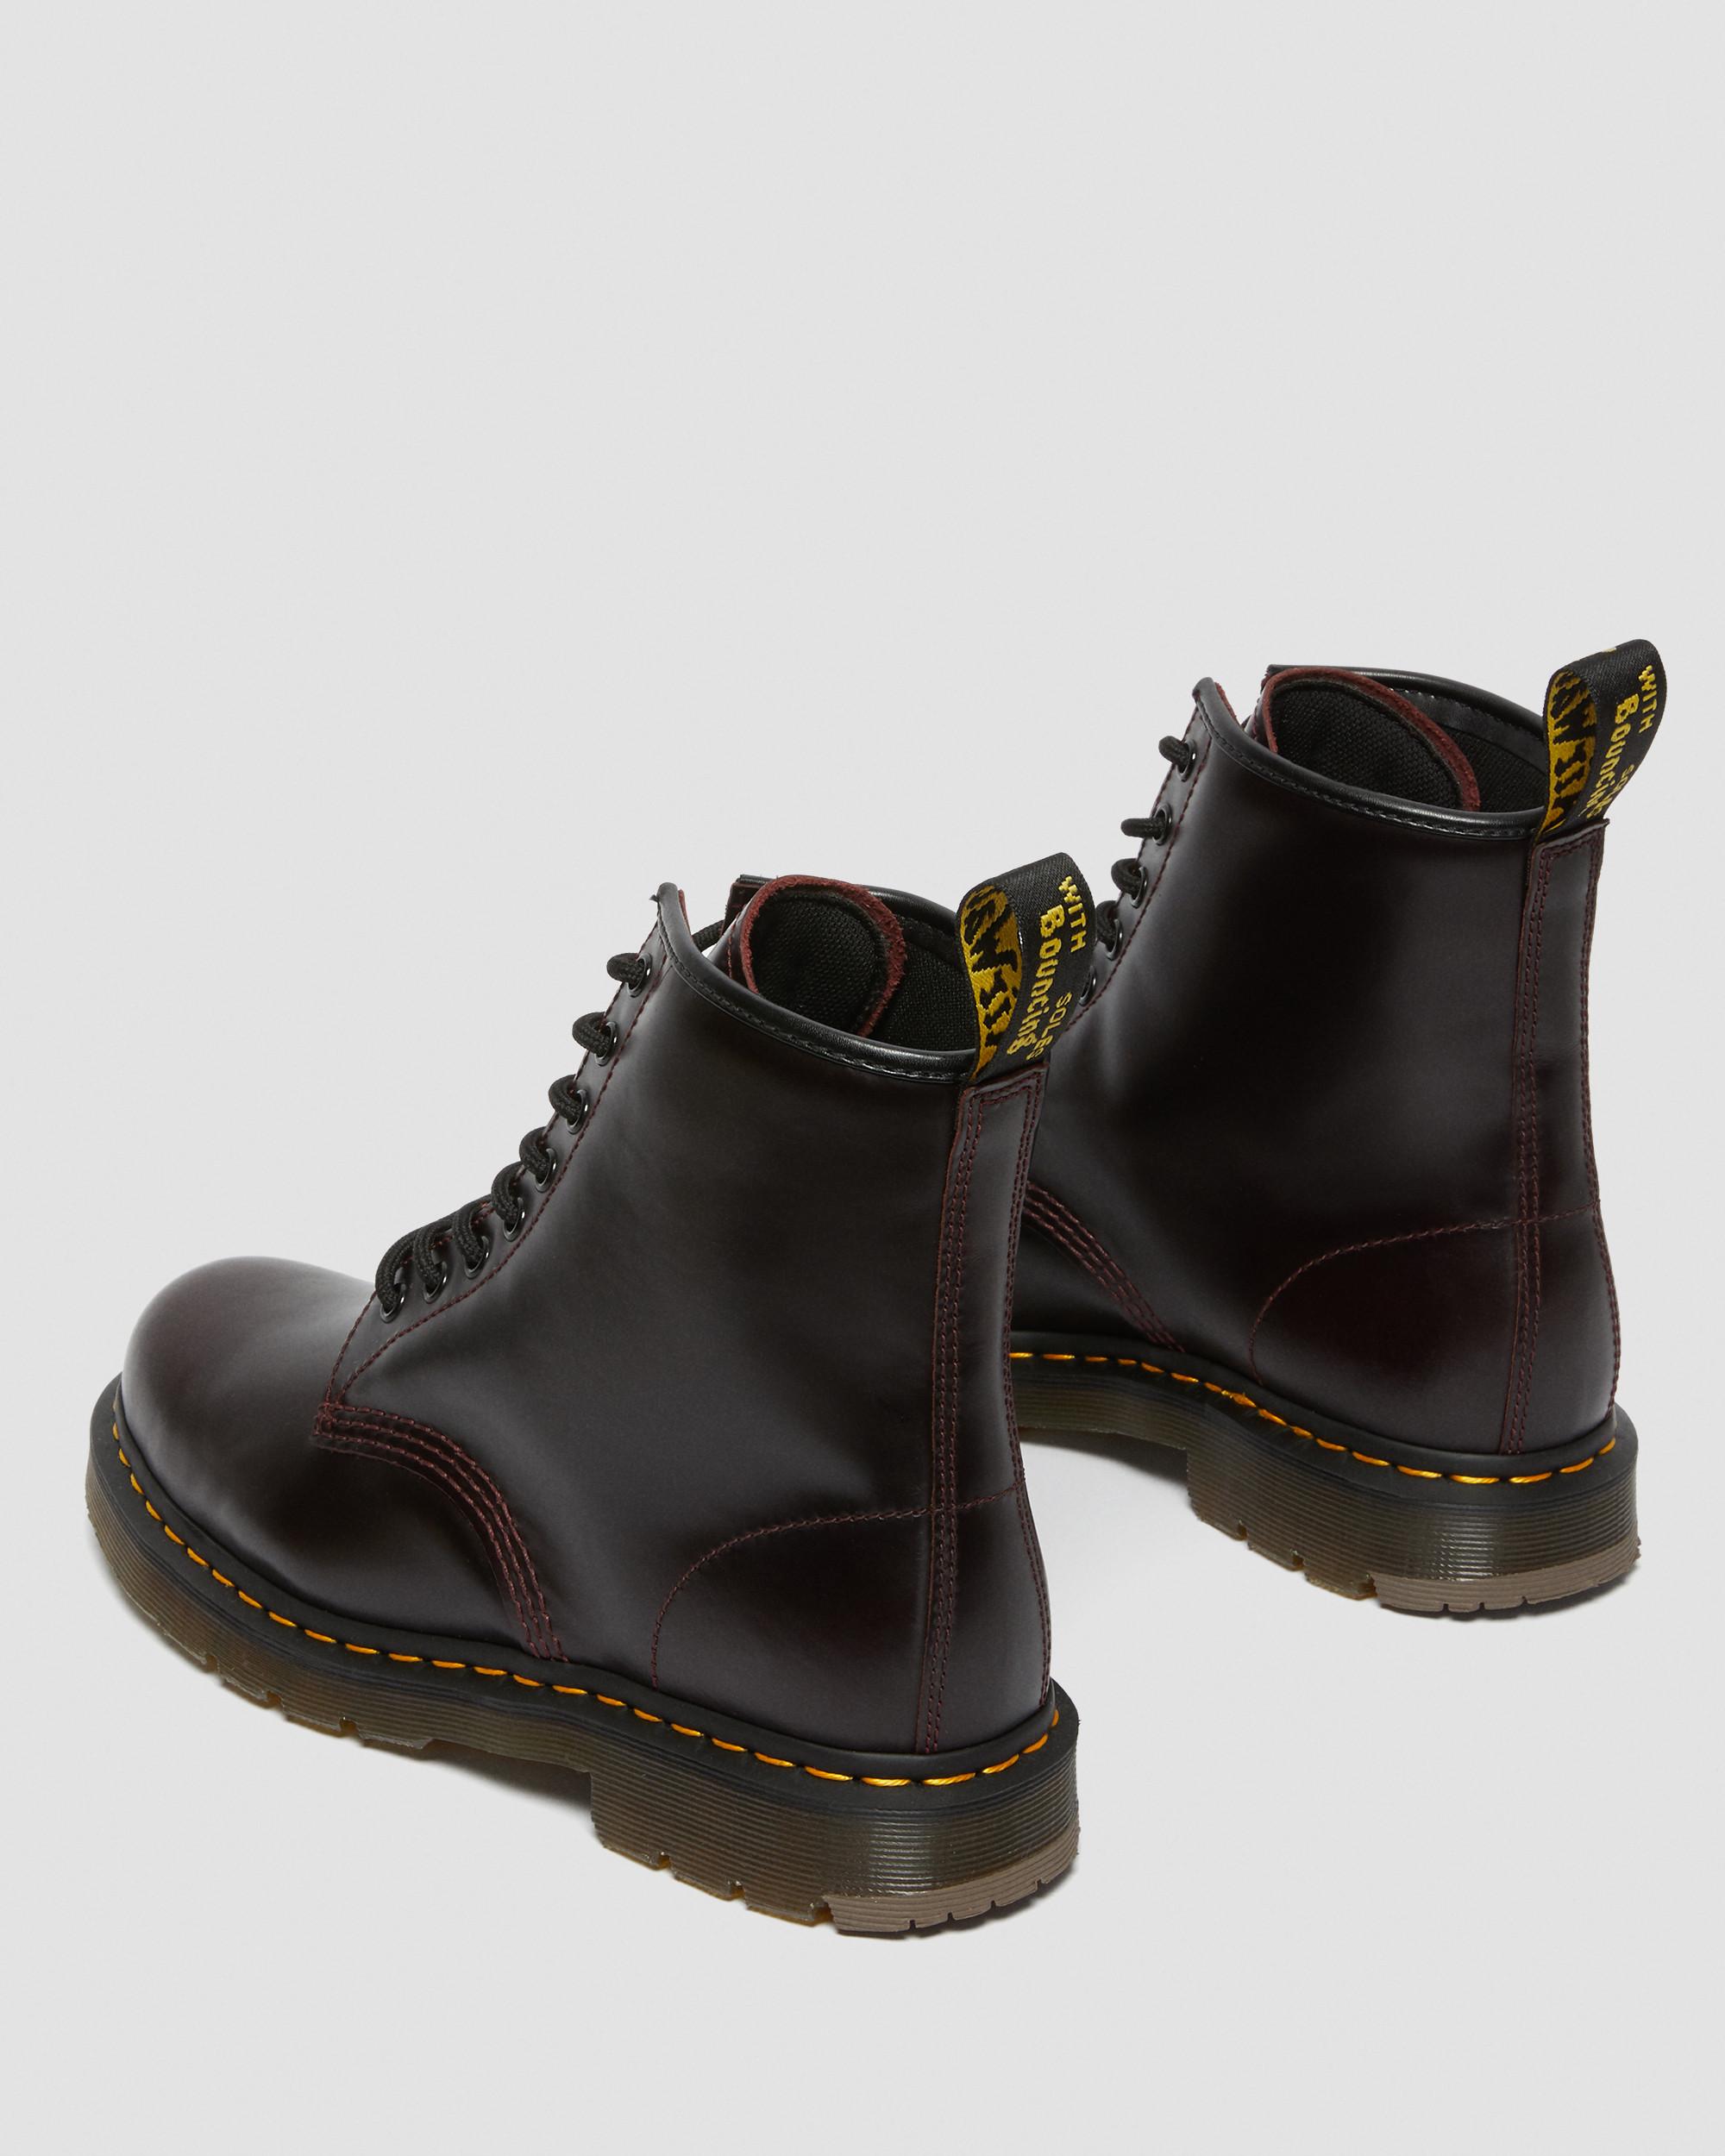 1460 Slip Resistant Atlas Leather Lace Up Boots in Oxblood | Dr. Martens